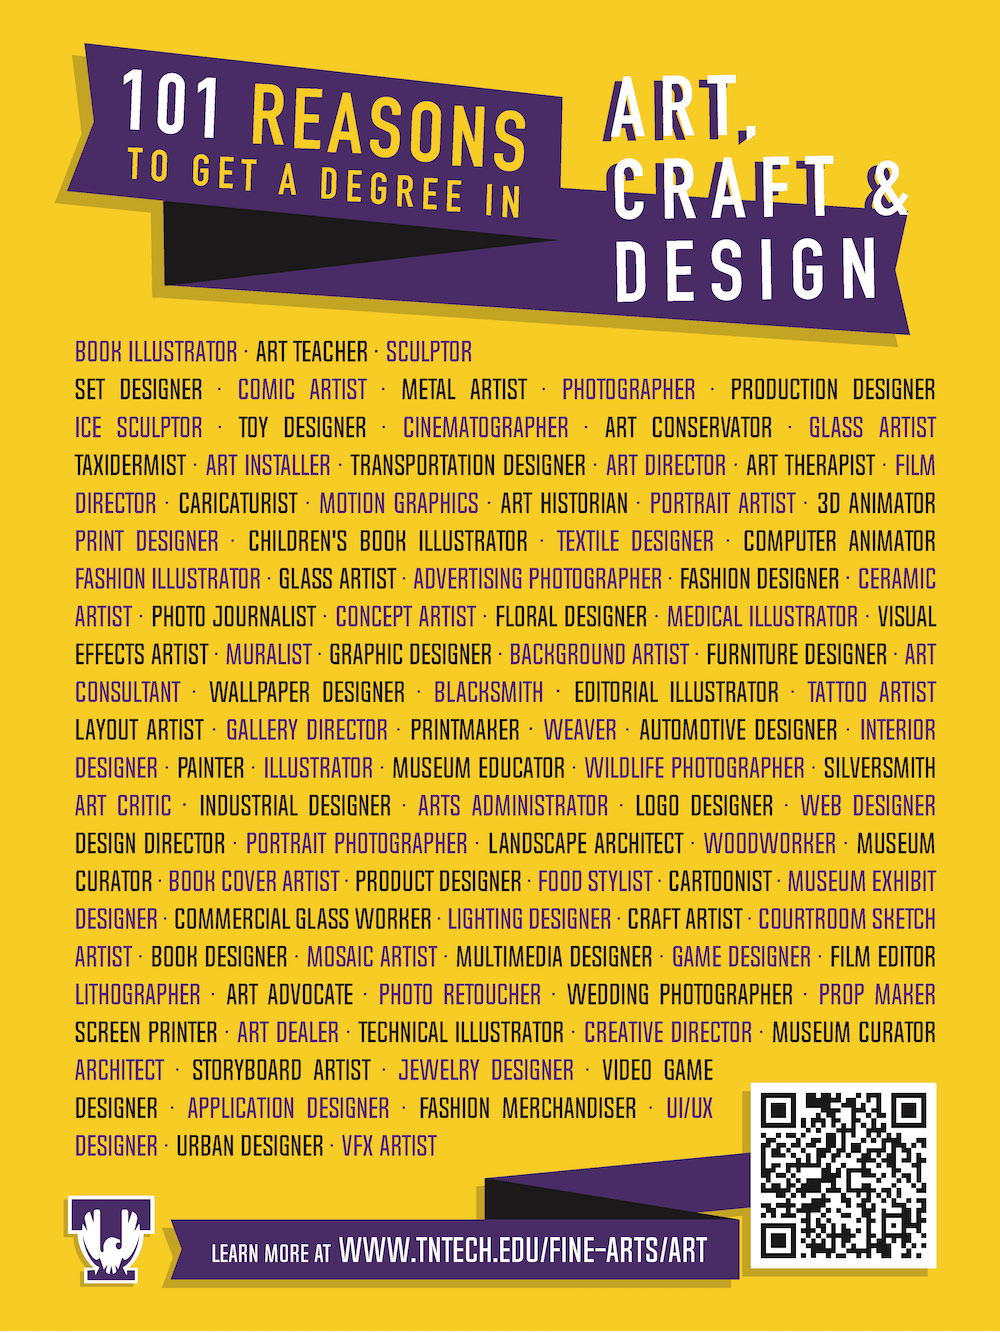 101 Reasons to Get a Degree in Art, Craft and Design PDF Poster